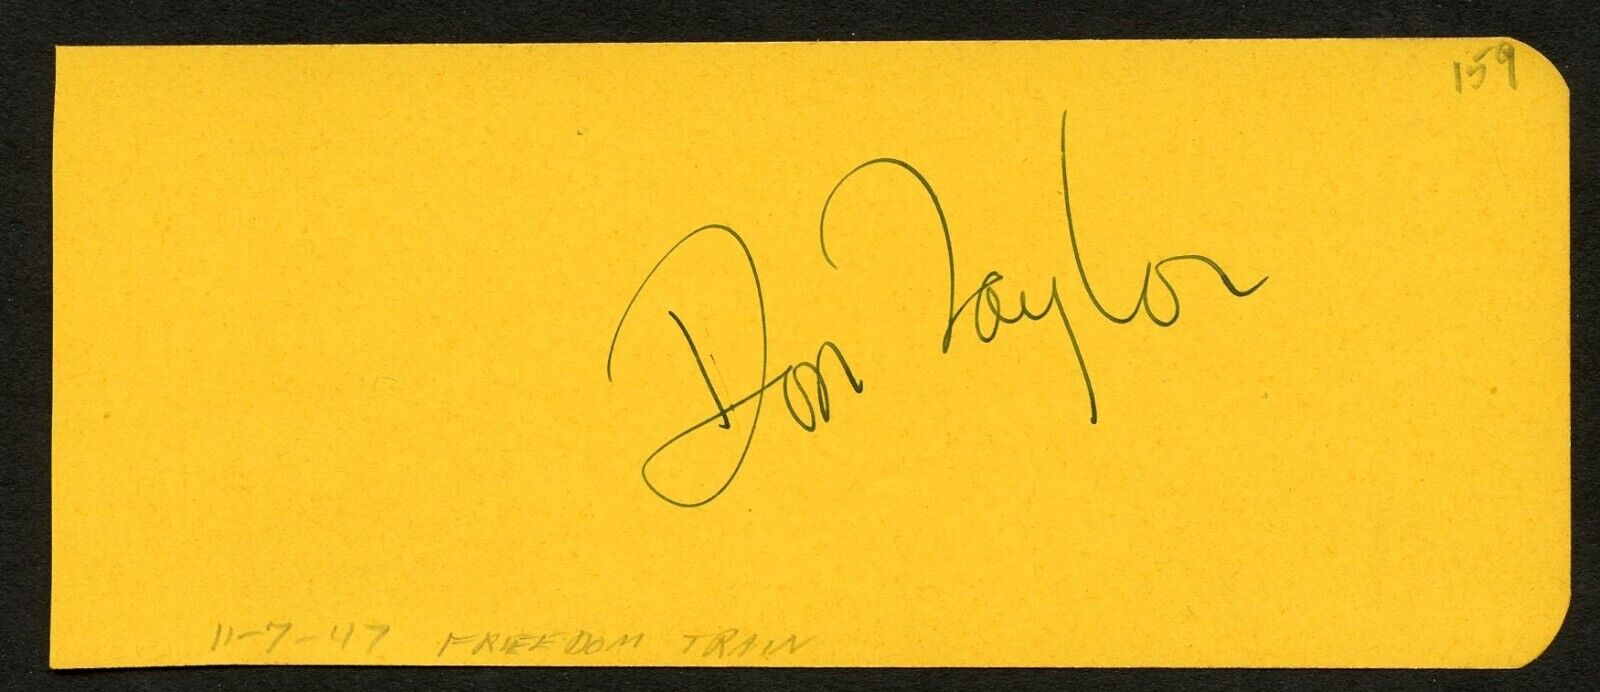 Don Taylor d1998 signed 2x5 cut autograph on 11-7-47 at Freedom Train